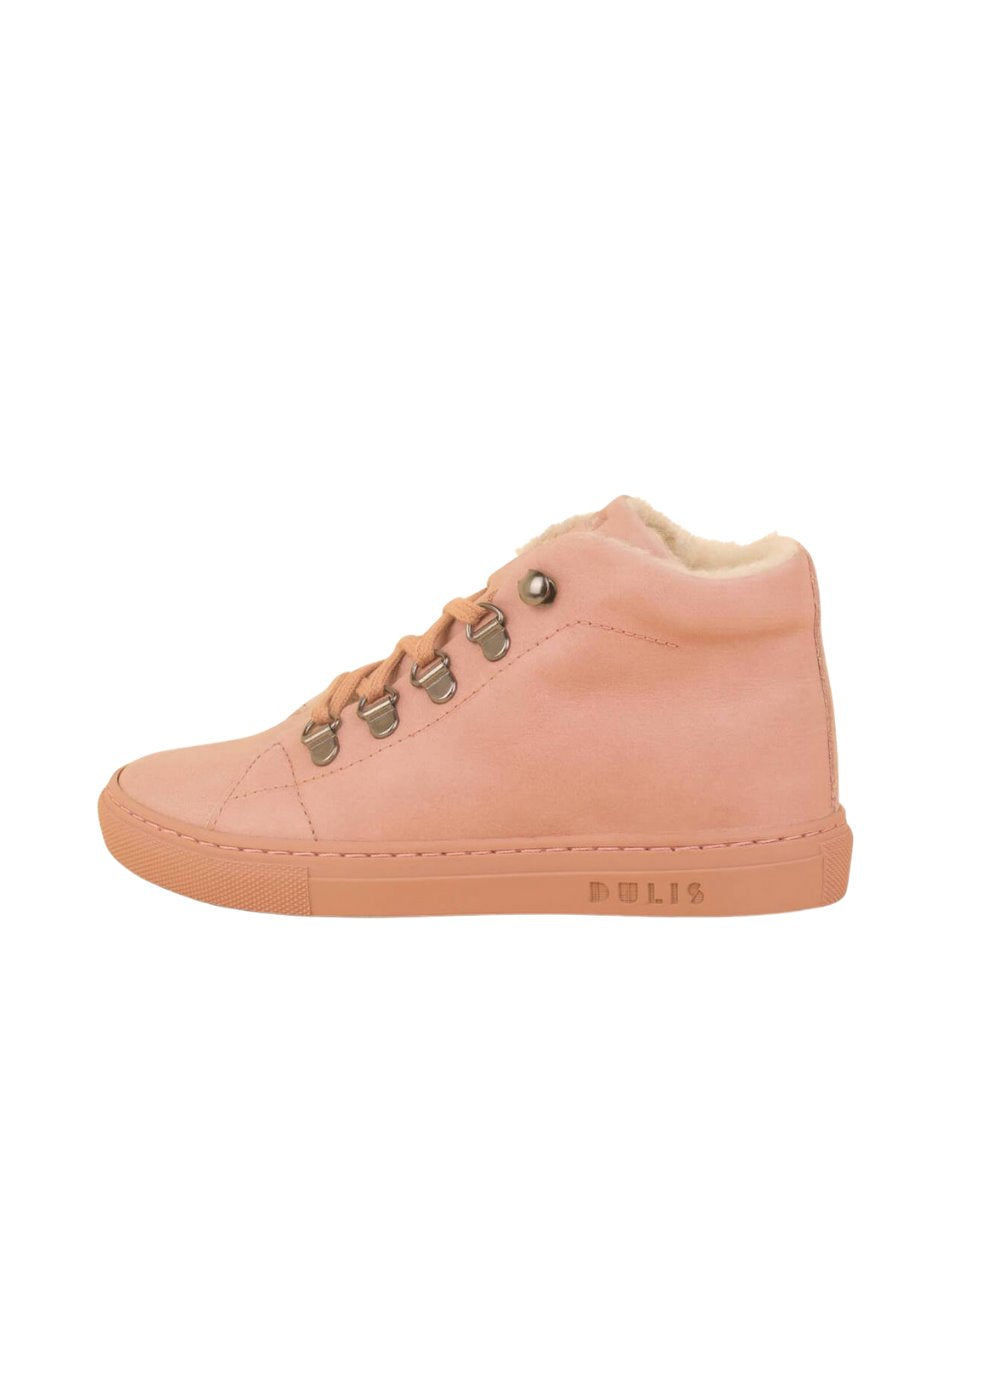 Rose Mid Sneakers Shoes Dulis Shoes 